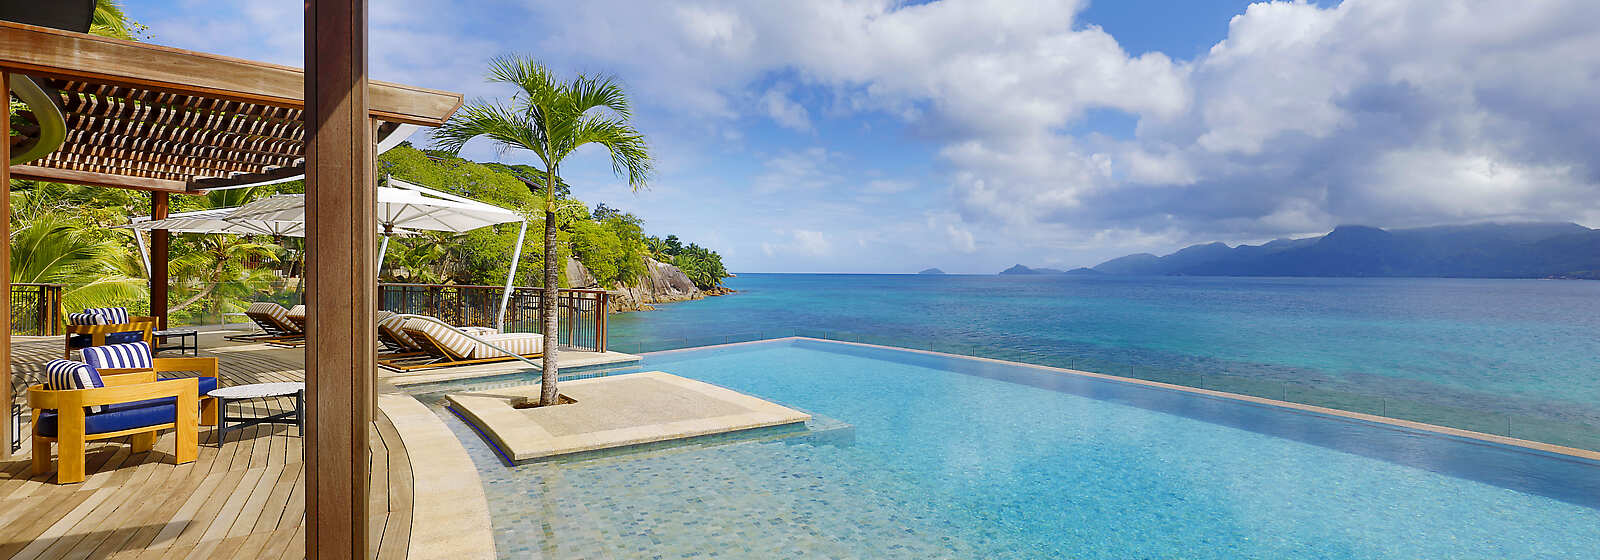 The House pool, infinity pool where it seems to connect to the ocean 